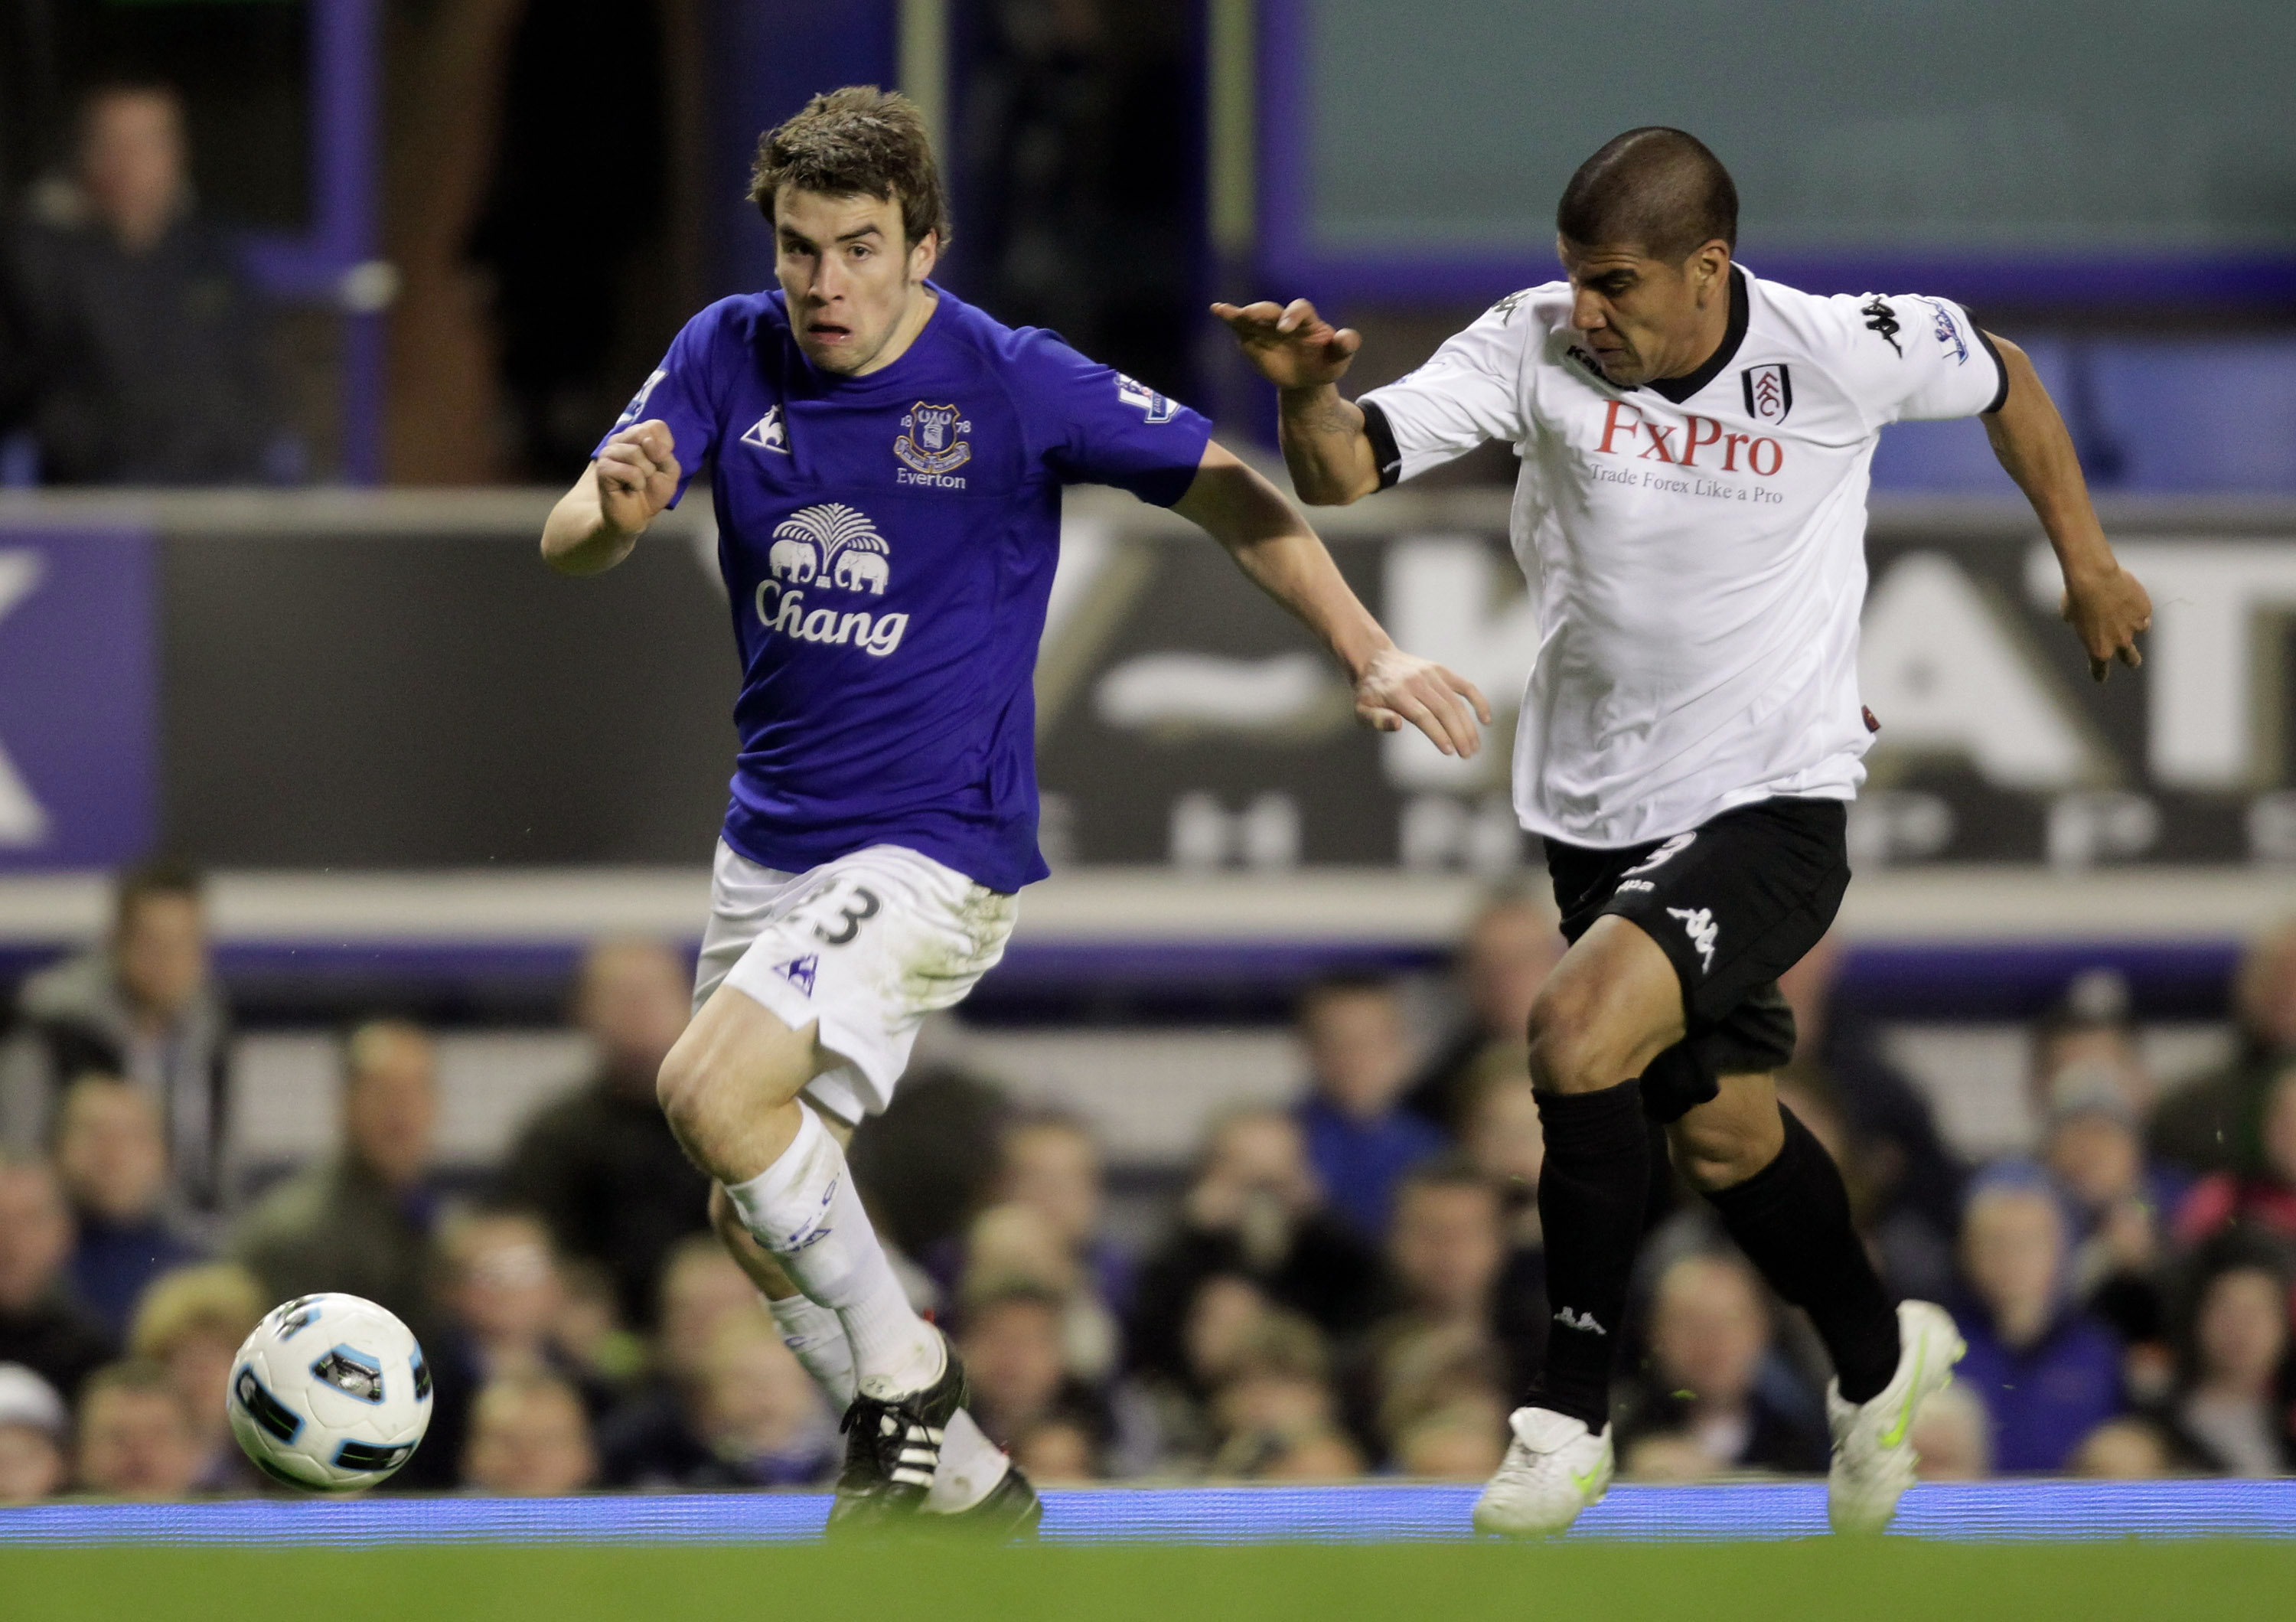 LIVERPOOL, ENGLAND - MARCH 19:  Seamus Coleman of Everton (L) competes with Carlos Salcido of Fulham during the Barclays Premier League match between Everton and Fulham at Goodison Park on March 19, 2011 in Liverpool, England. (Photo by Ross Kinnaird/Gett